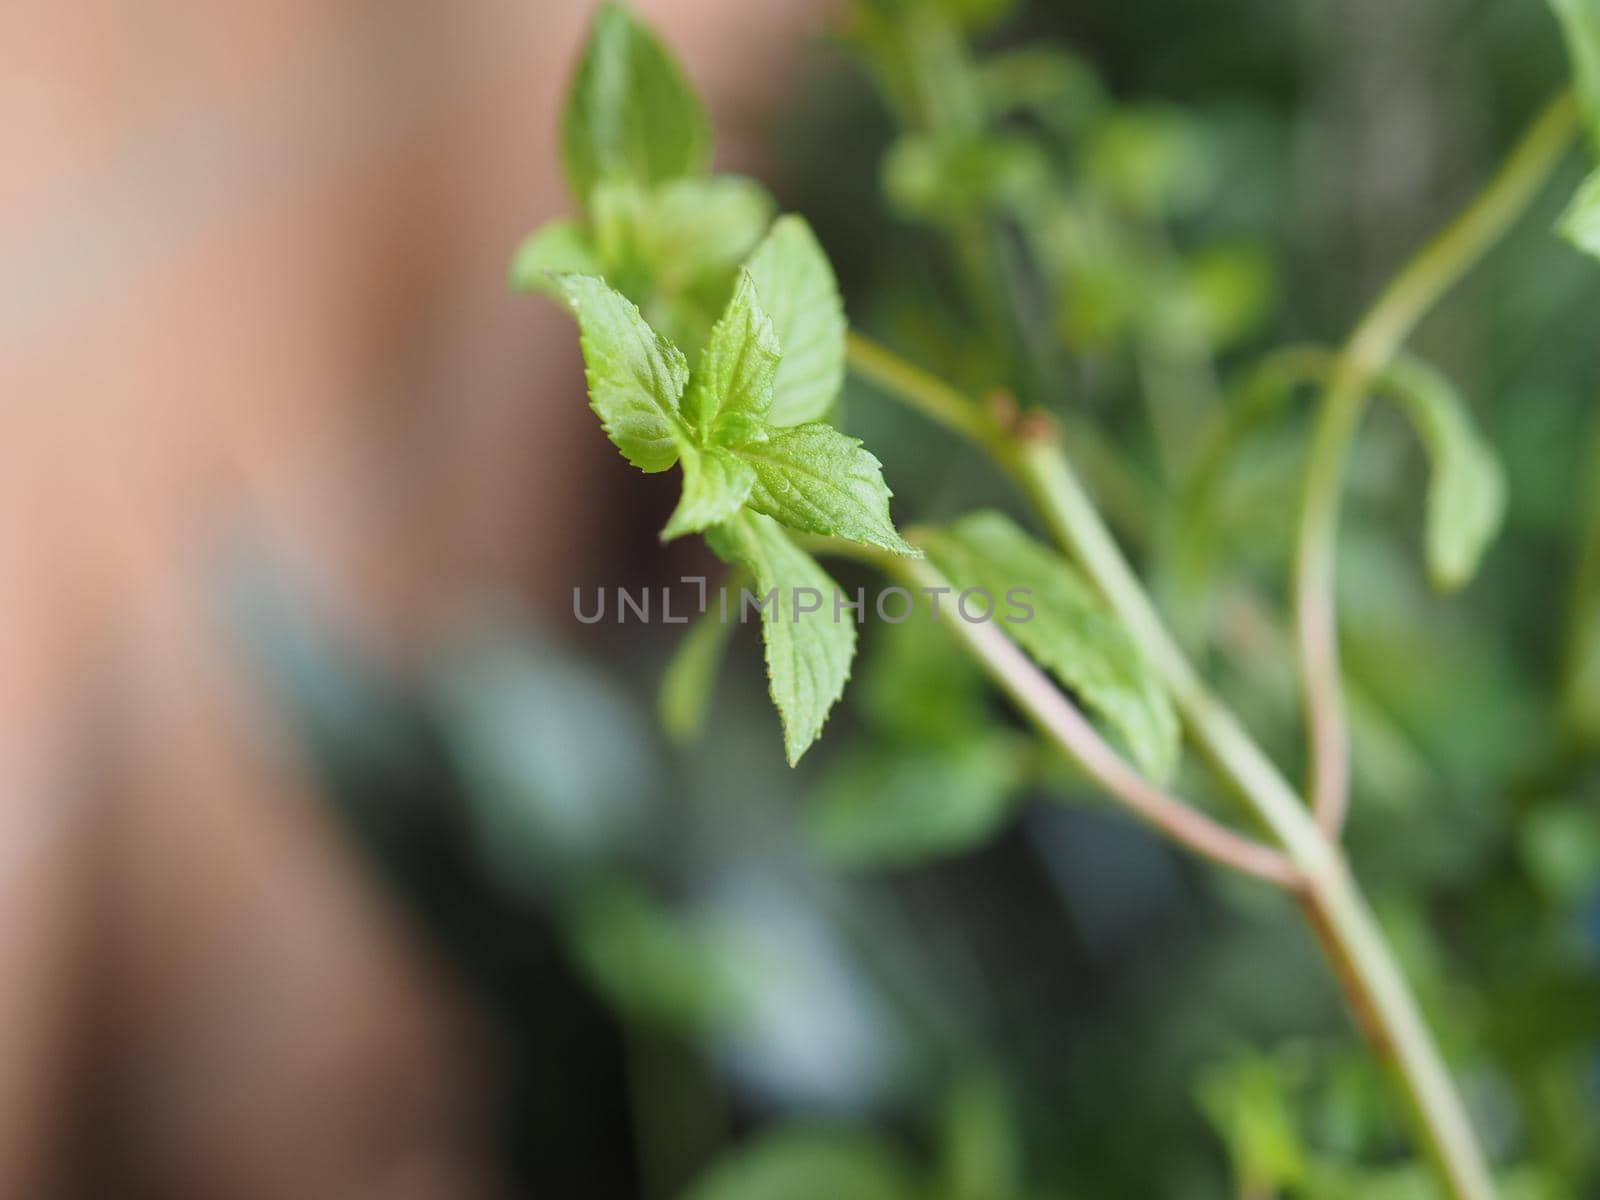 peppermint plant scient. name Mentha piperita selective focus by claudiodivizia